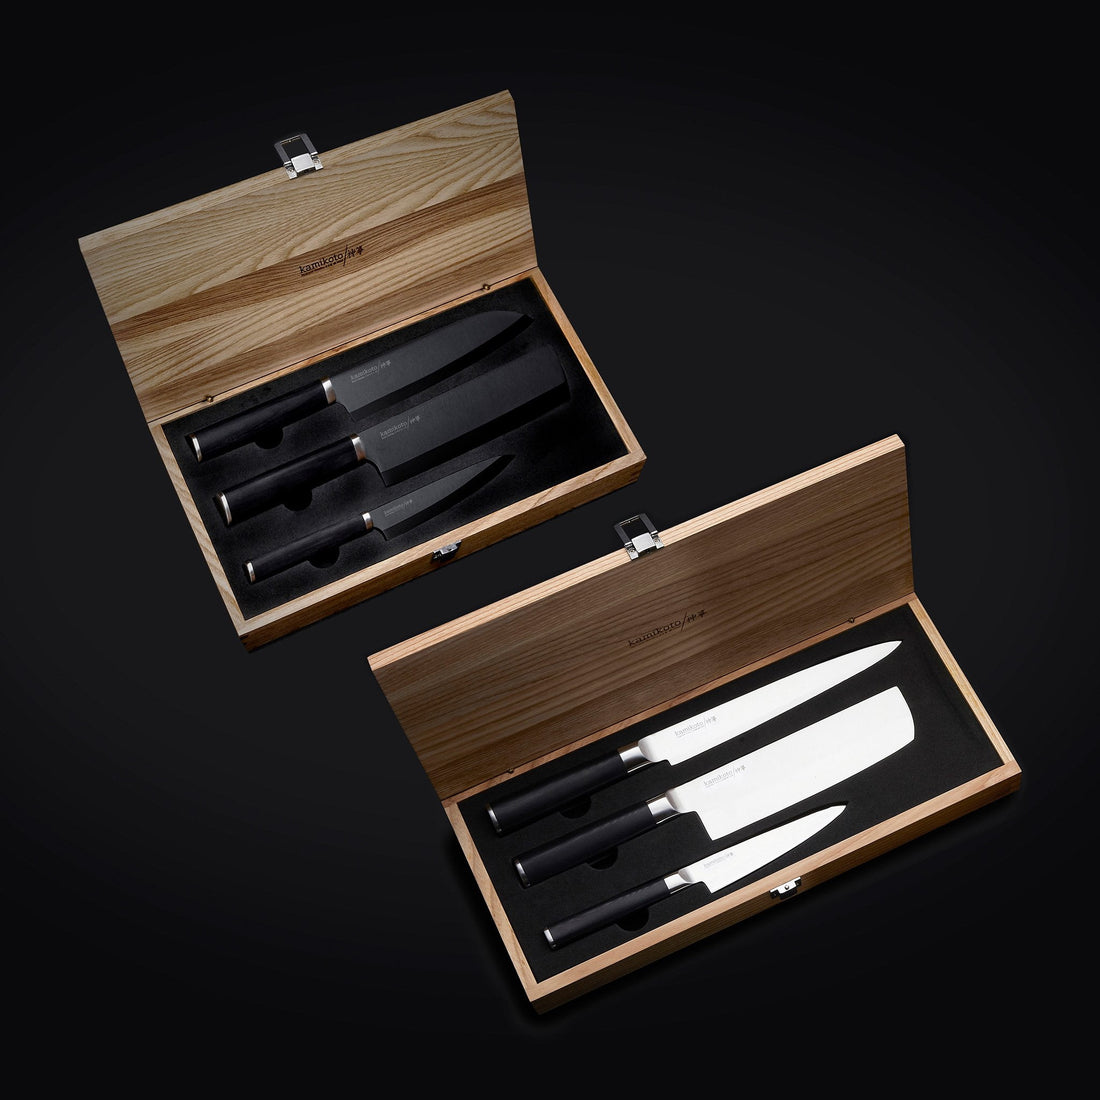 Unboxing Kamikoto's Kanpeki Knife Set- Review from an Experienced